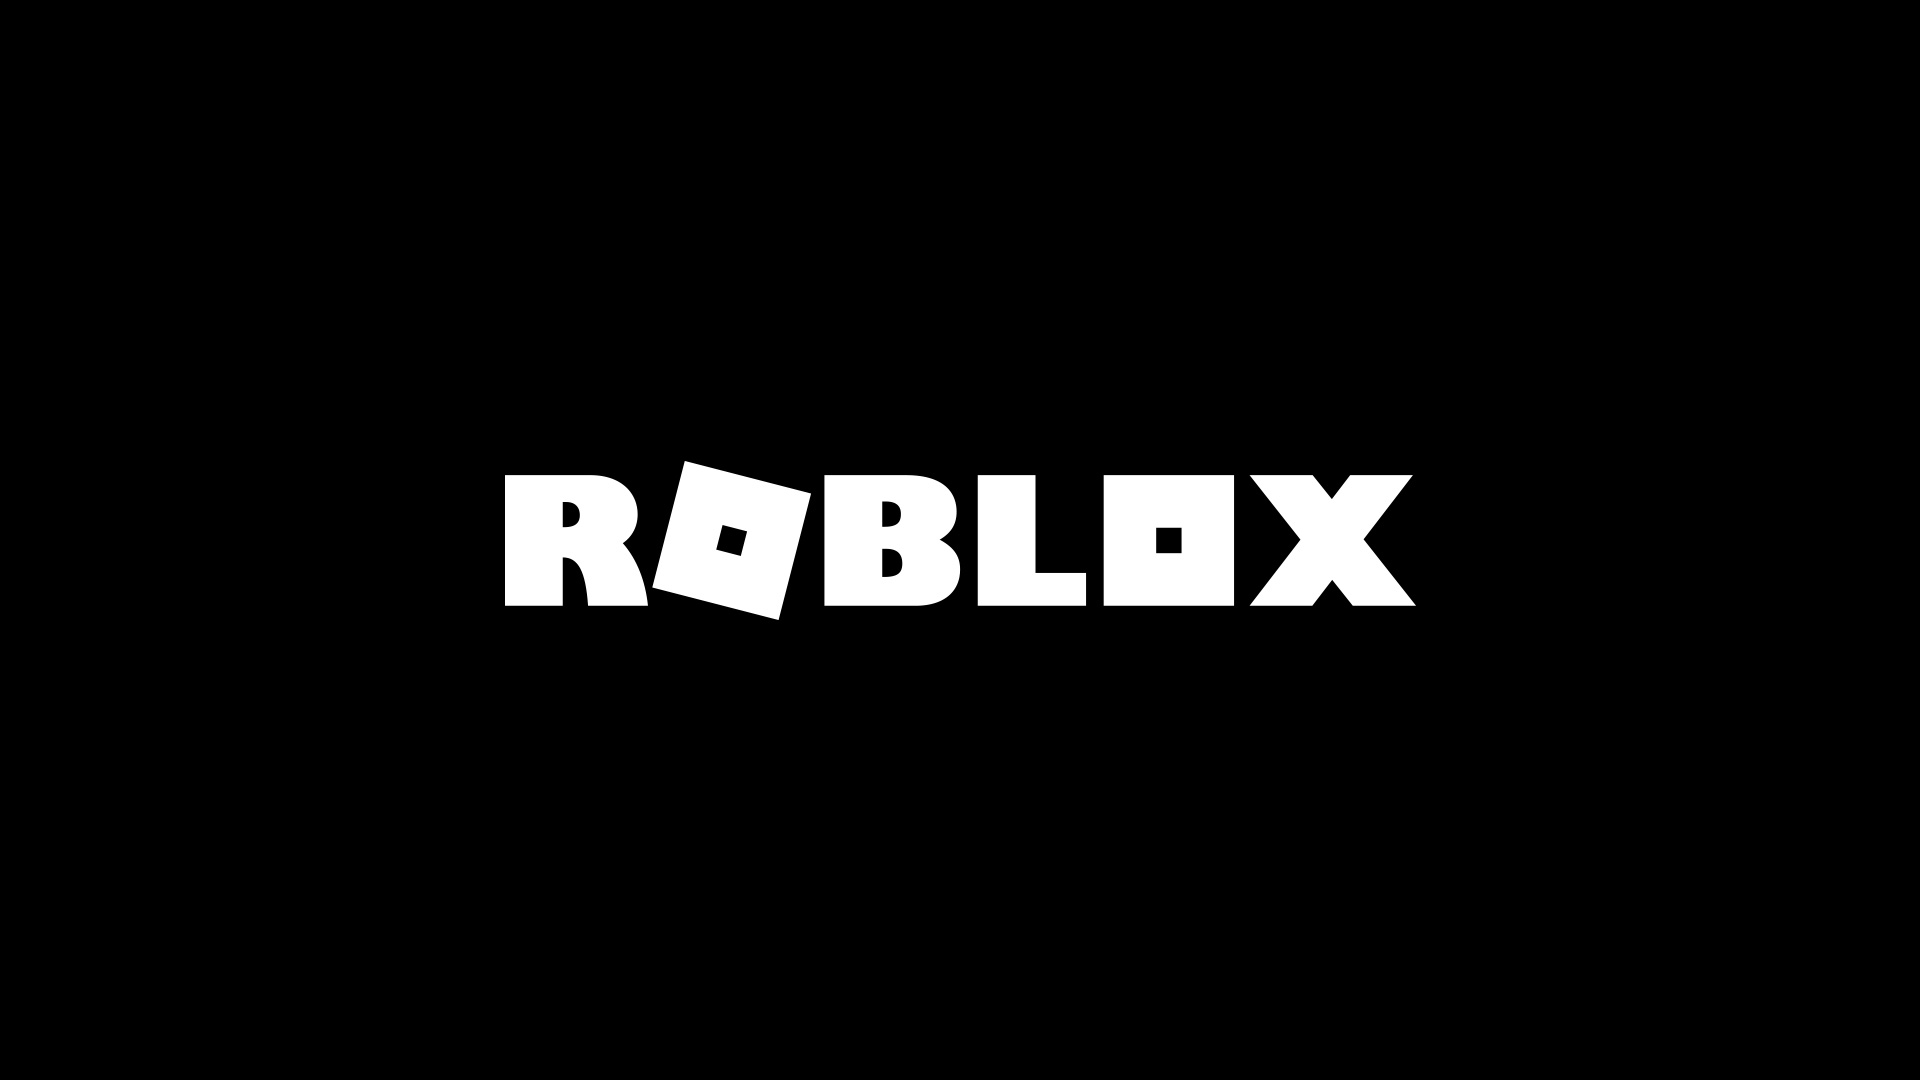 How To Get A Background On Roblox Ipad